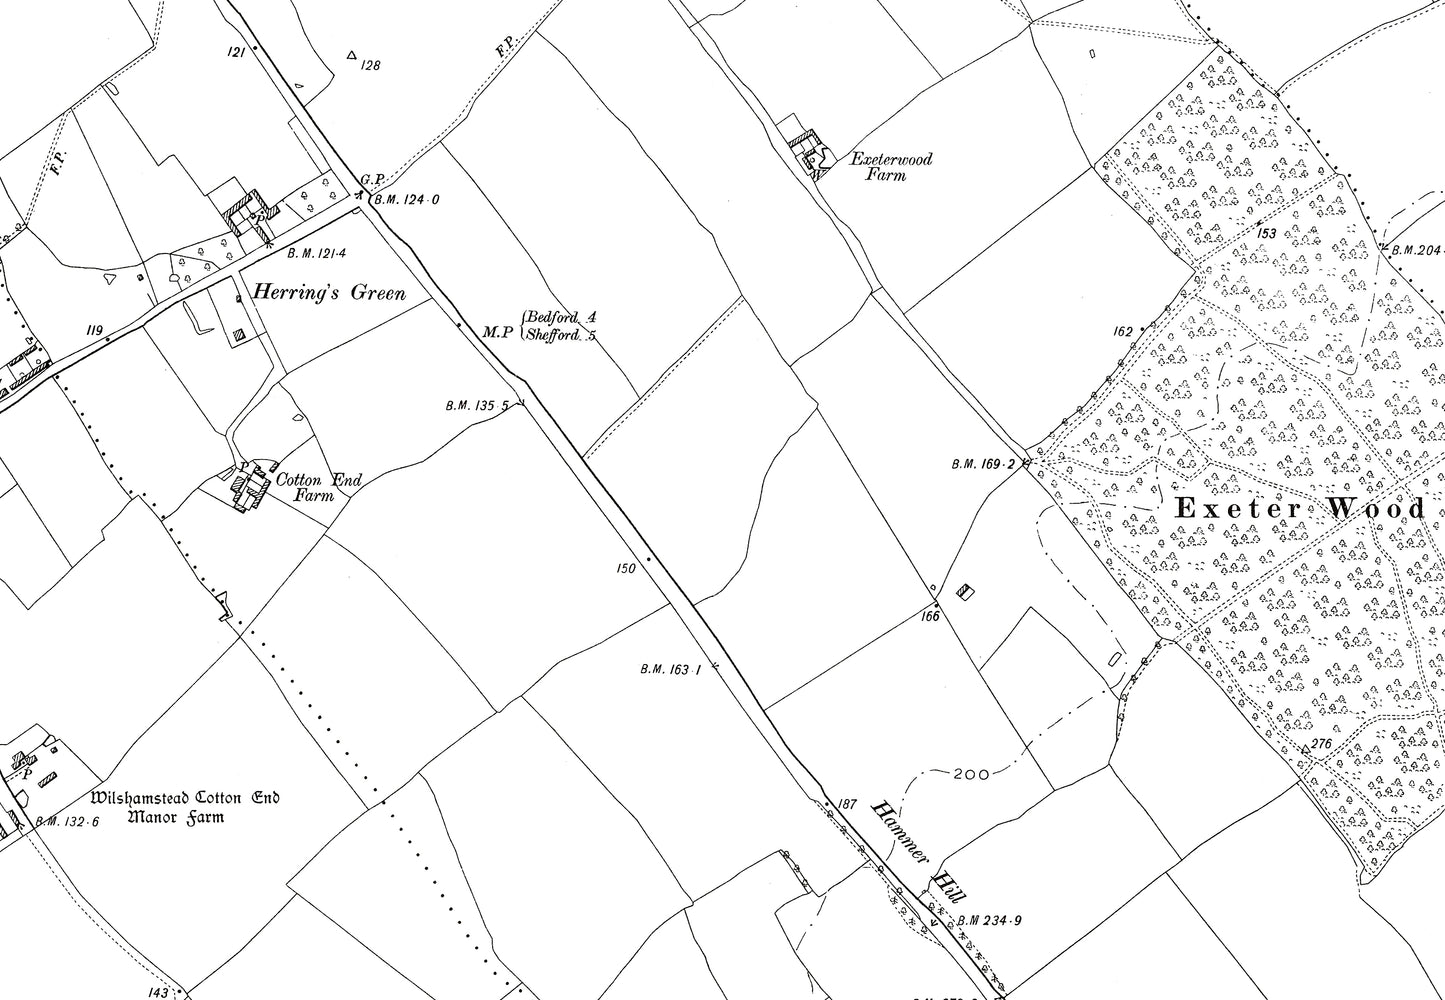 A 1901 map showing Wilshamstead and Cotton End in Bedfordshire - A Digital Download 0f OS 1:10560 scale map, Beds 17SW